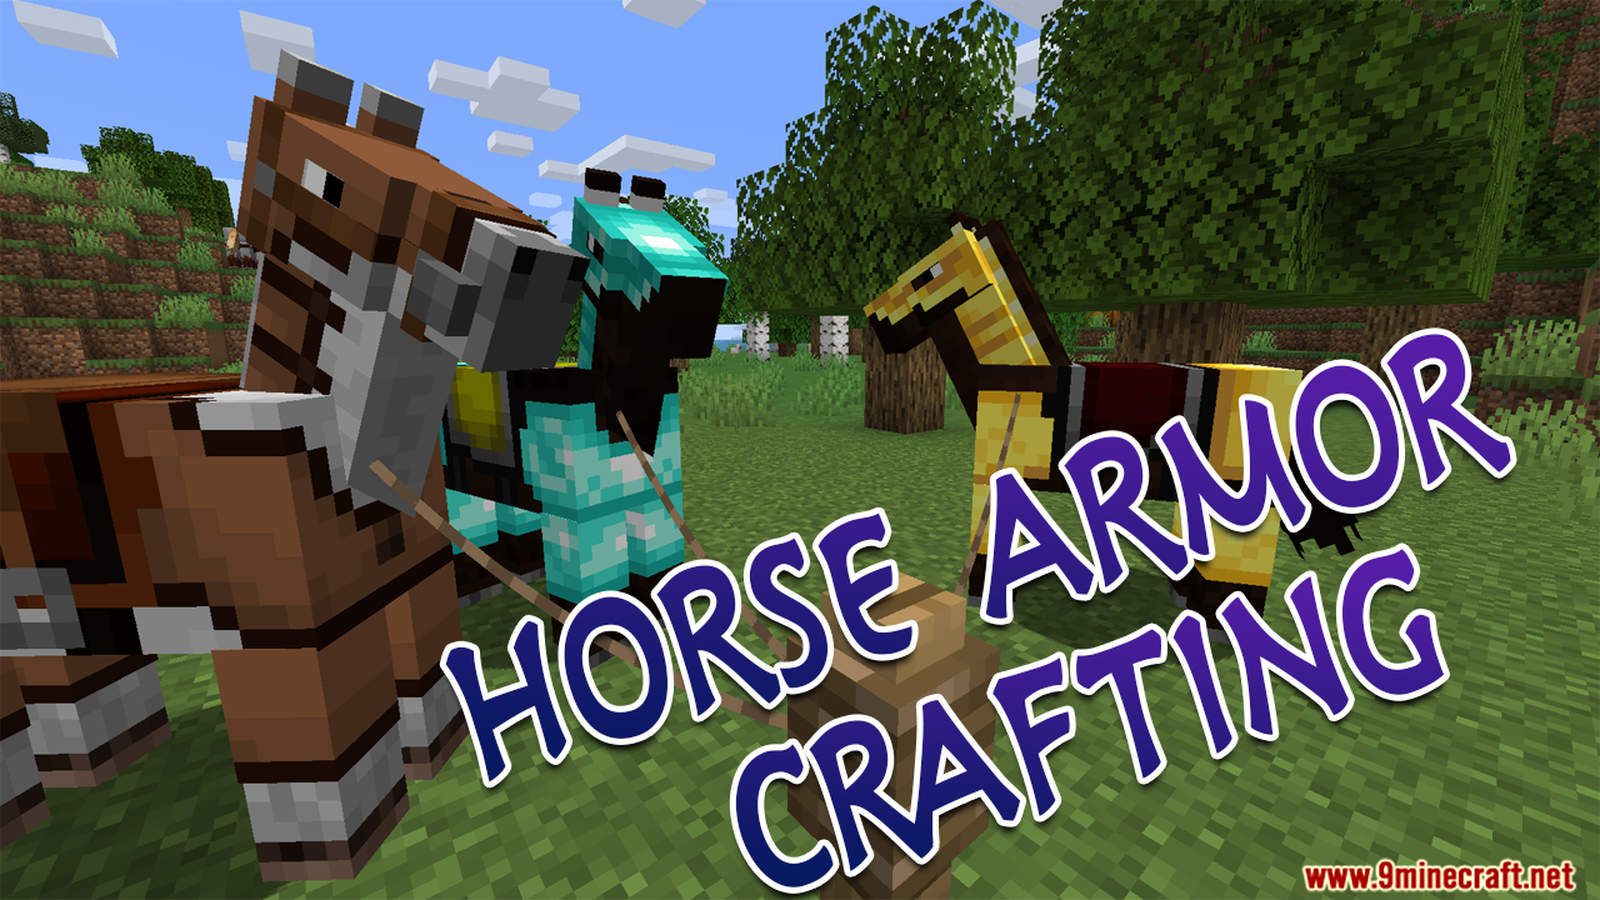 Horse Armor Crafting Data Pack Thumbnail